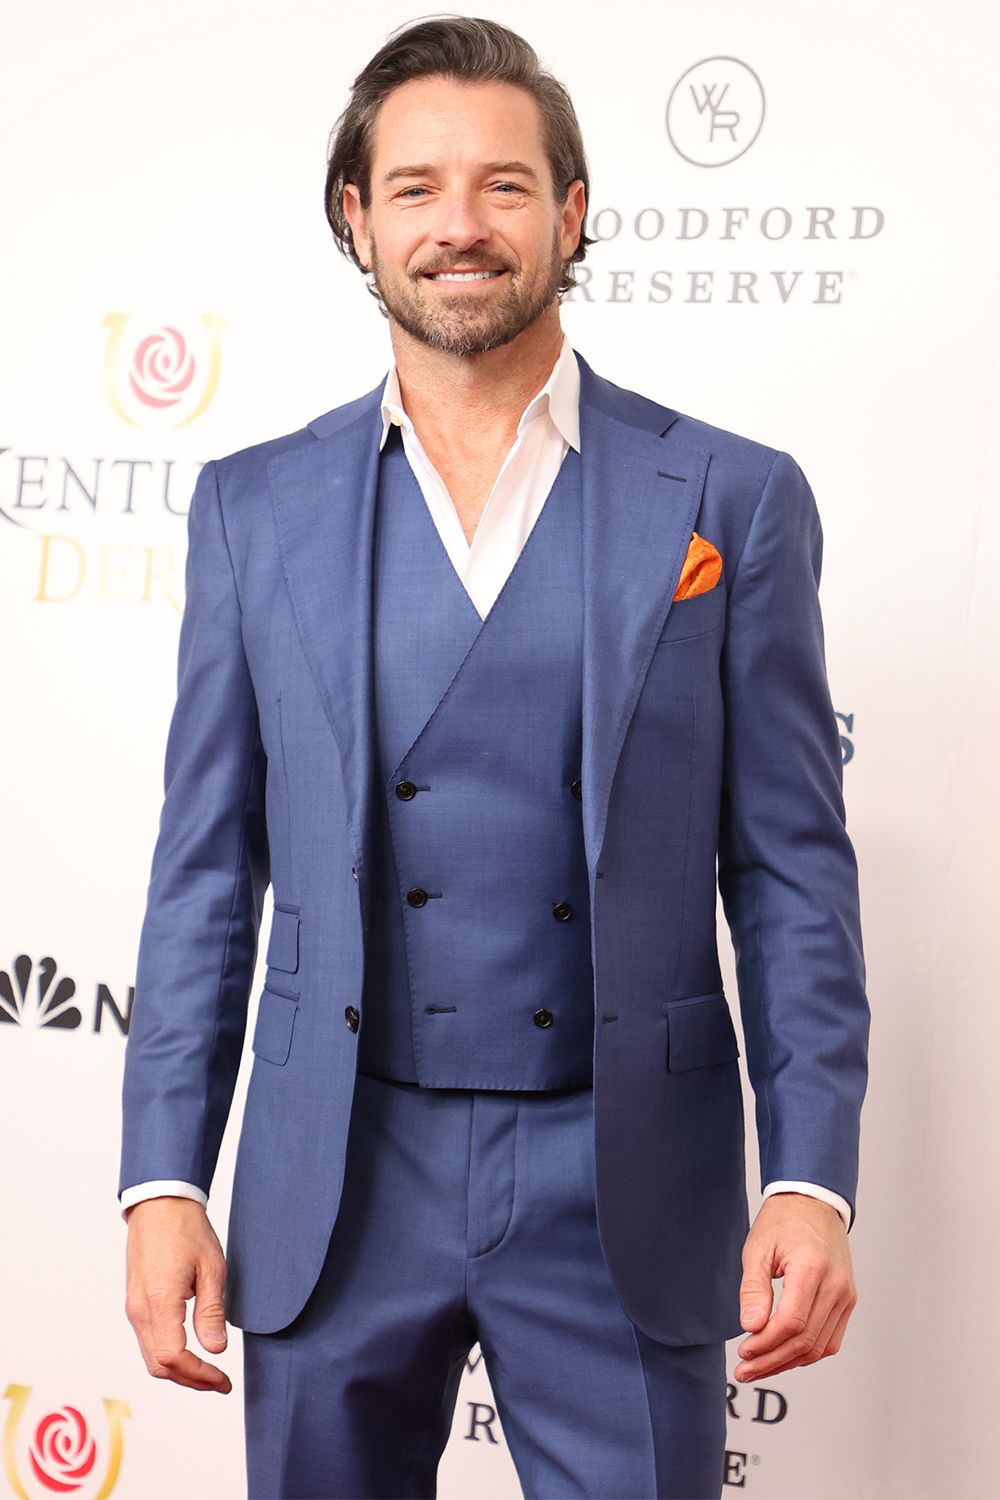 LOUISVILLE, KY - MAY 06: Yellowstone actor Ian Bohen walks the red carpet at the 149th running of the Kentucky Derby on May 6, 2023, at Churchill Downs in Louisville, Ky. (Photo by Jeff Moreland/Icon Sportswire via Getty Images)